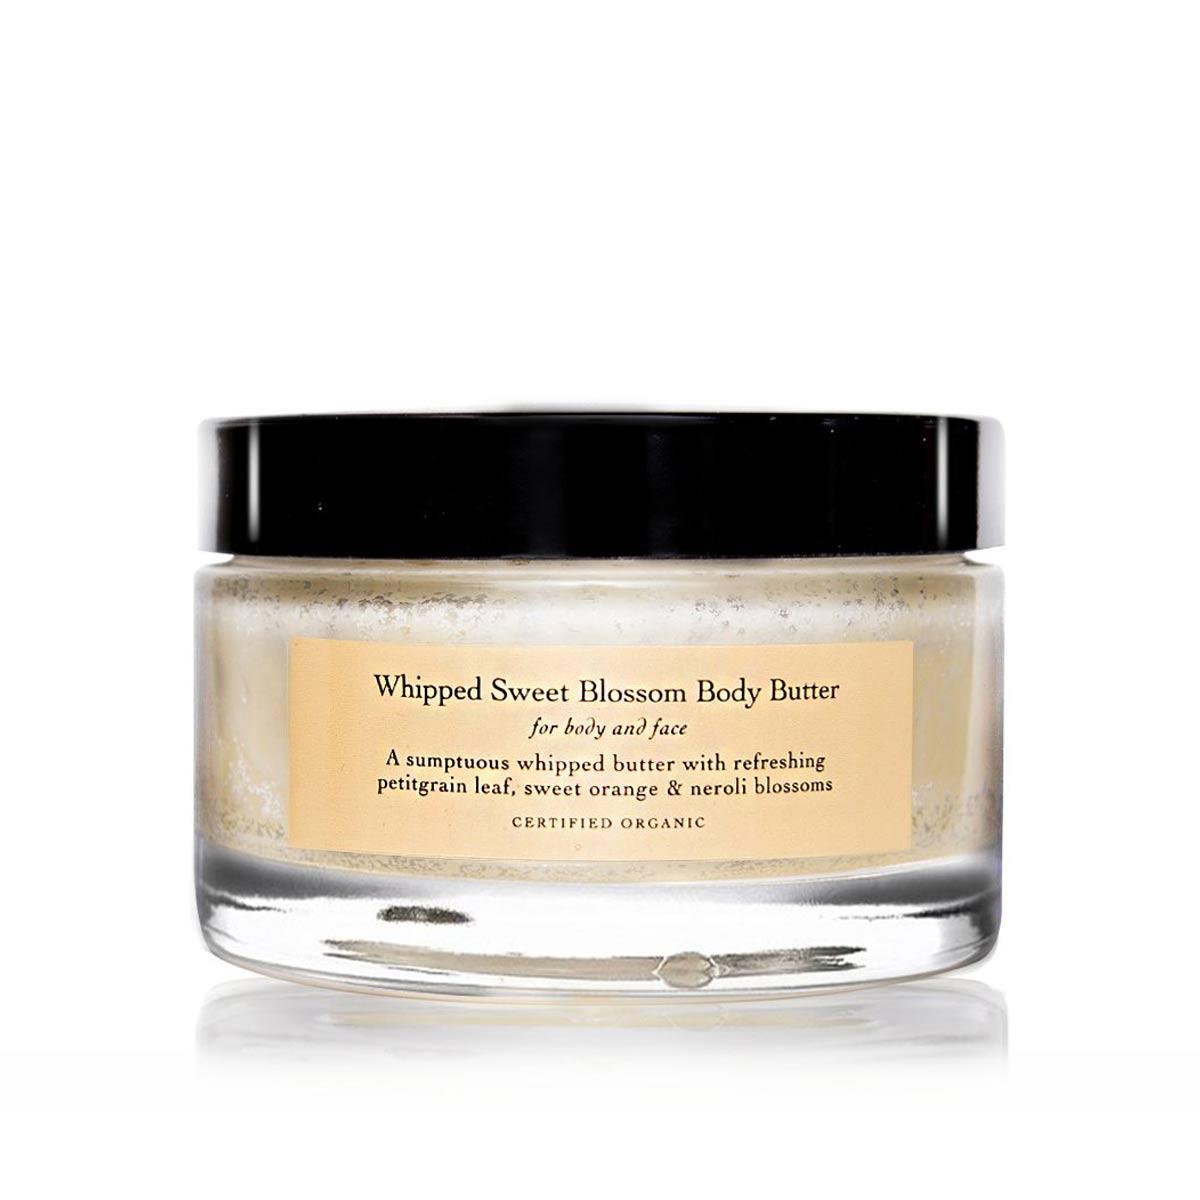 Primary image of Whipped Sweet Blossom Body Butter